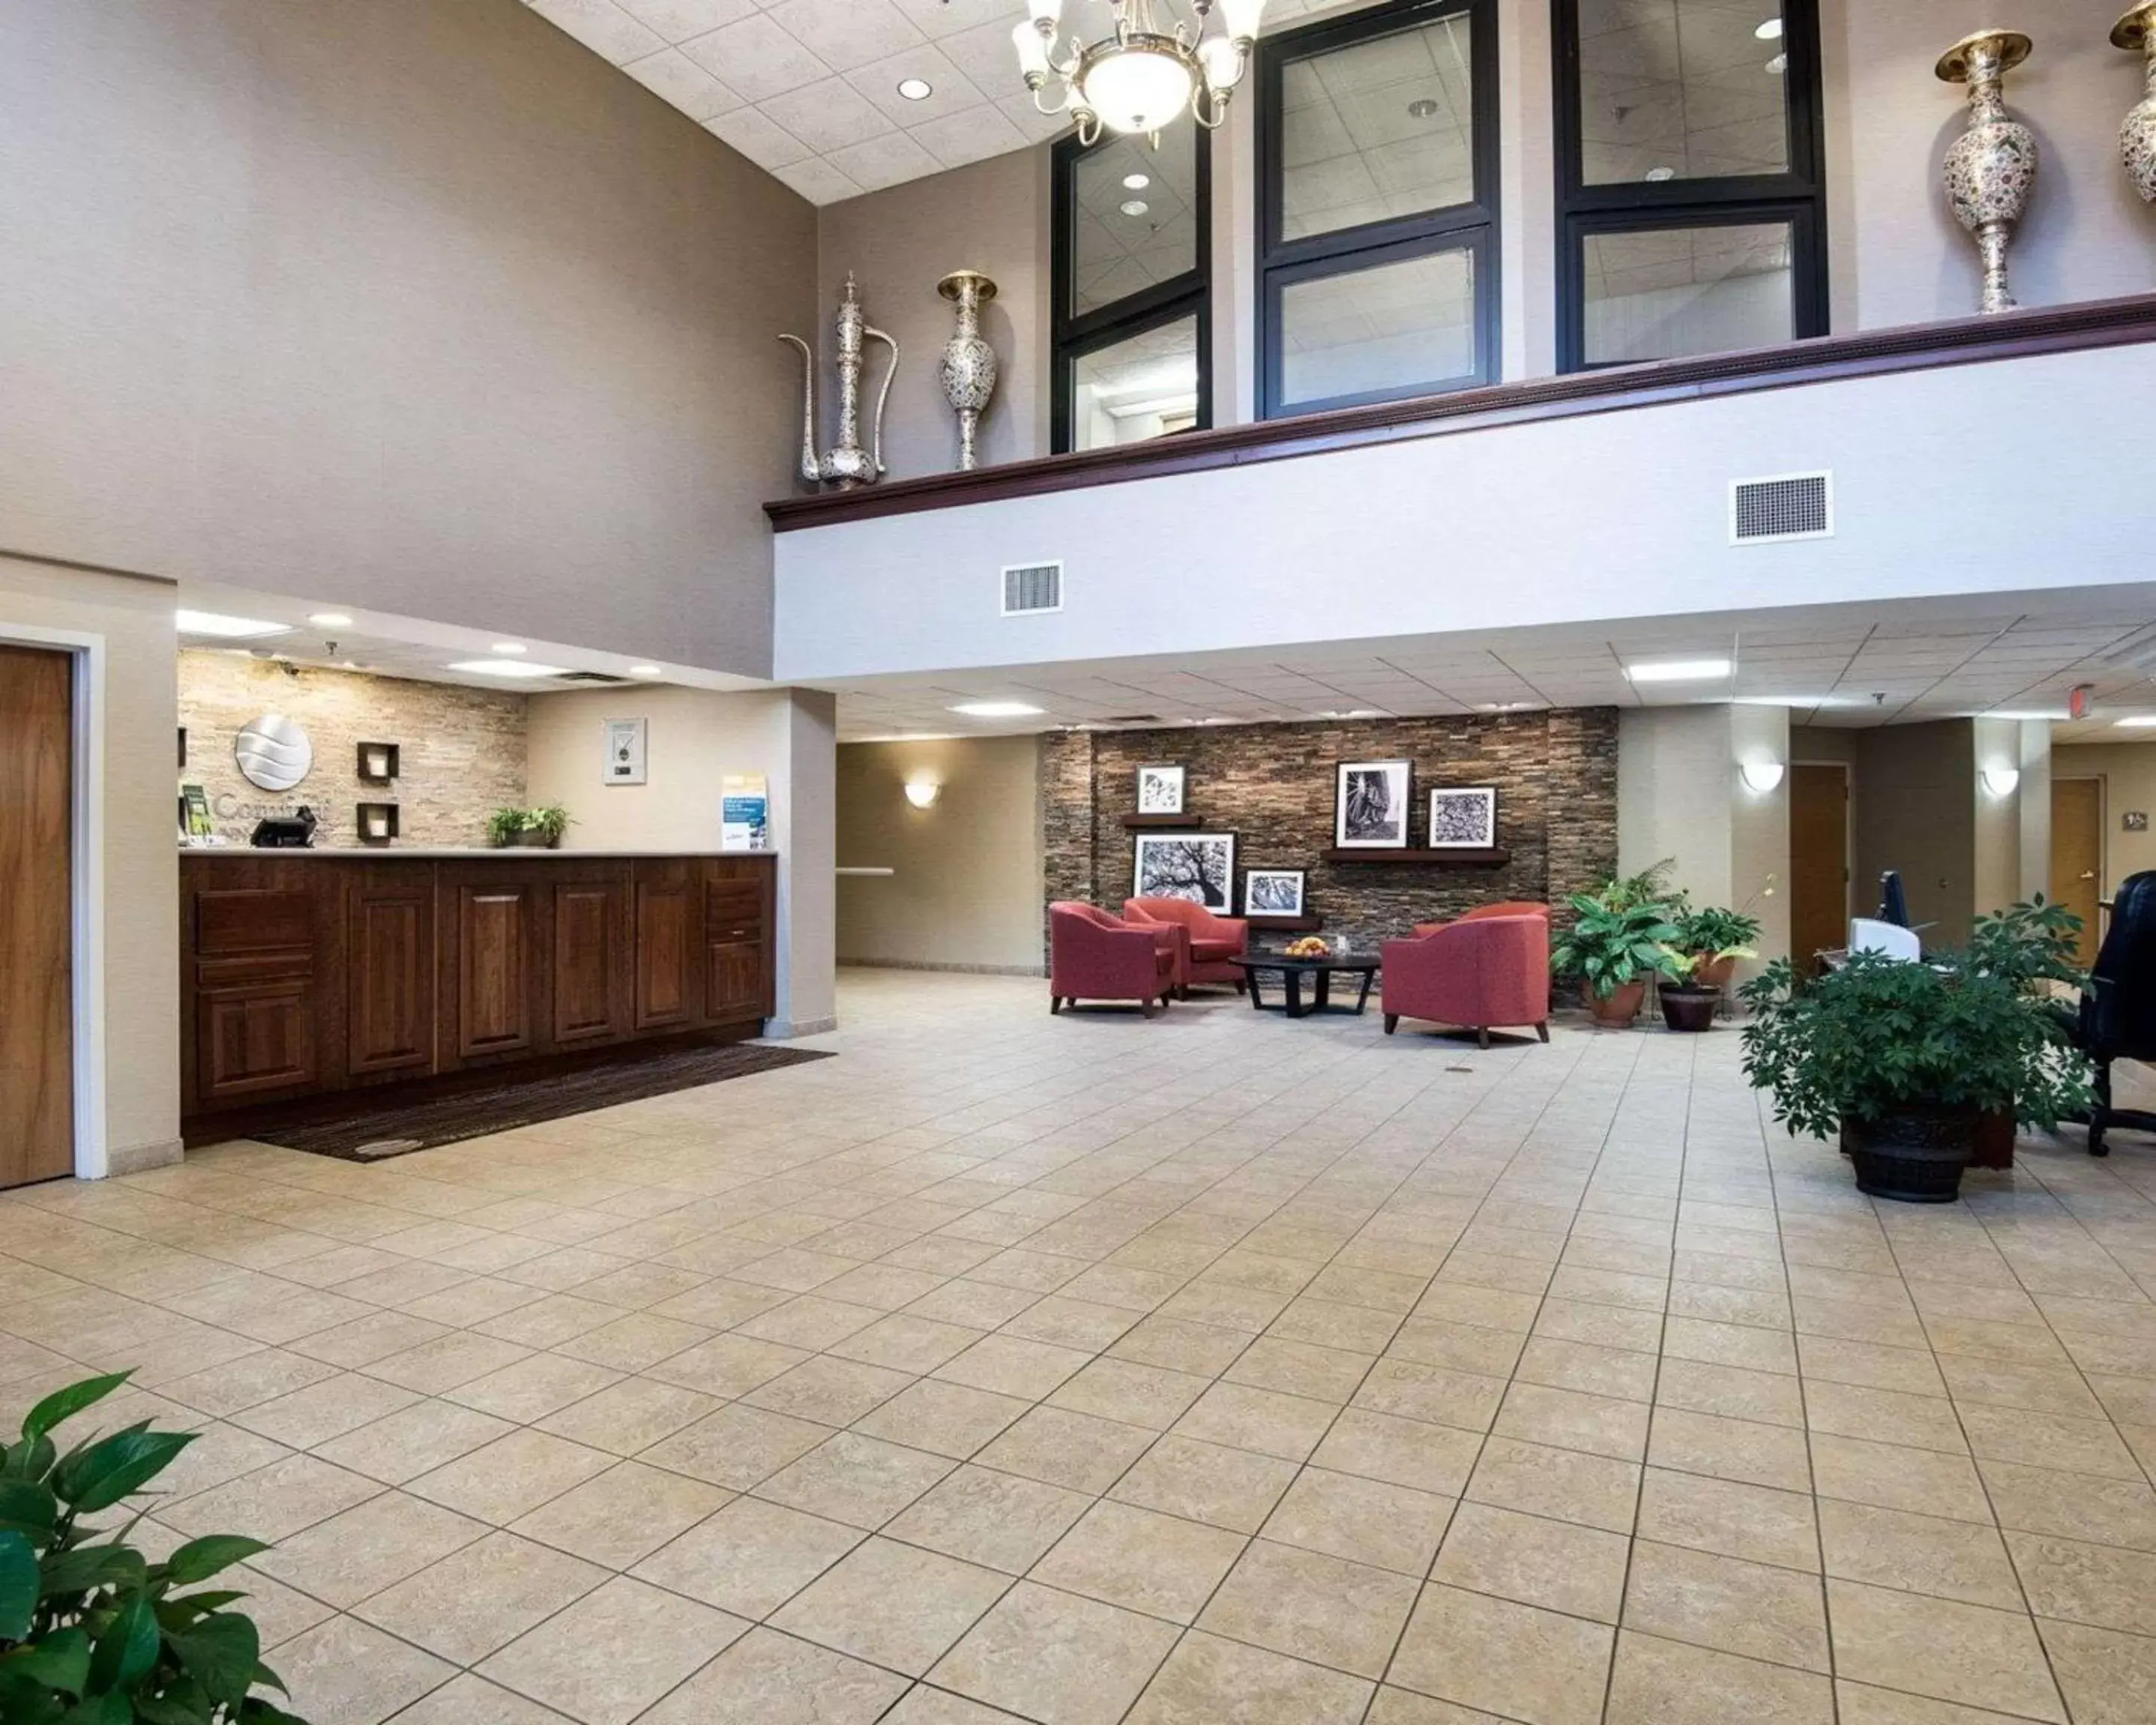 Lobby or reception in Comfort Inn & Suites - LaVale - Cumberland